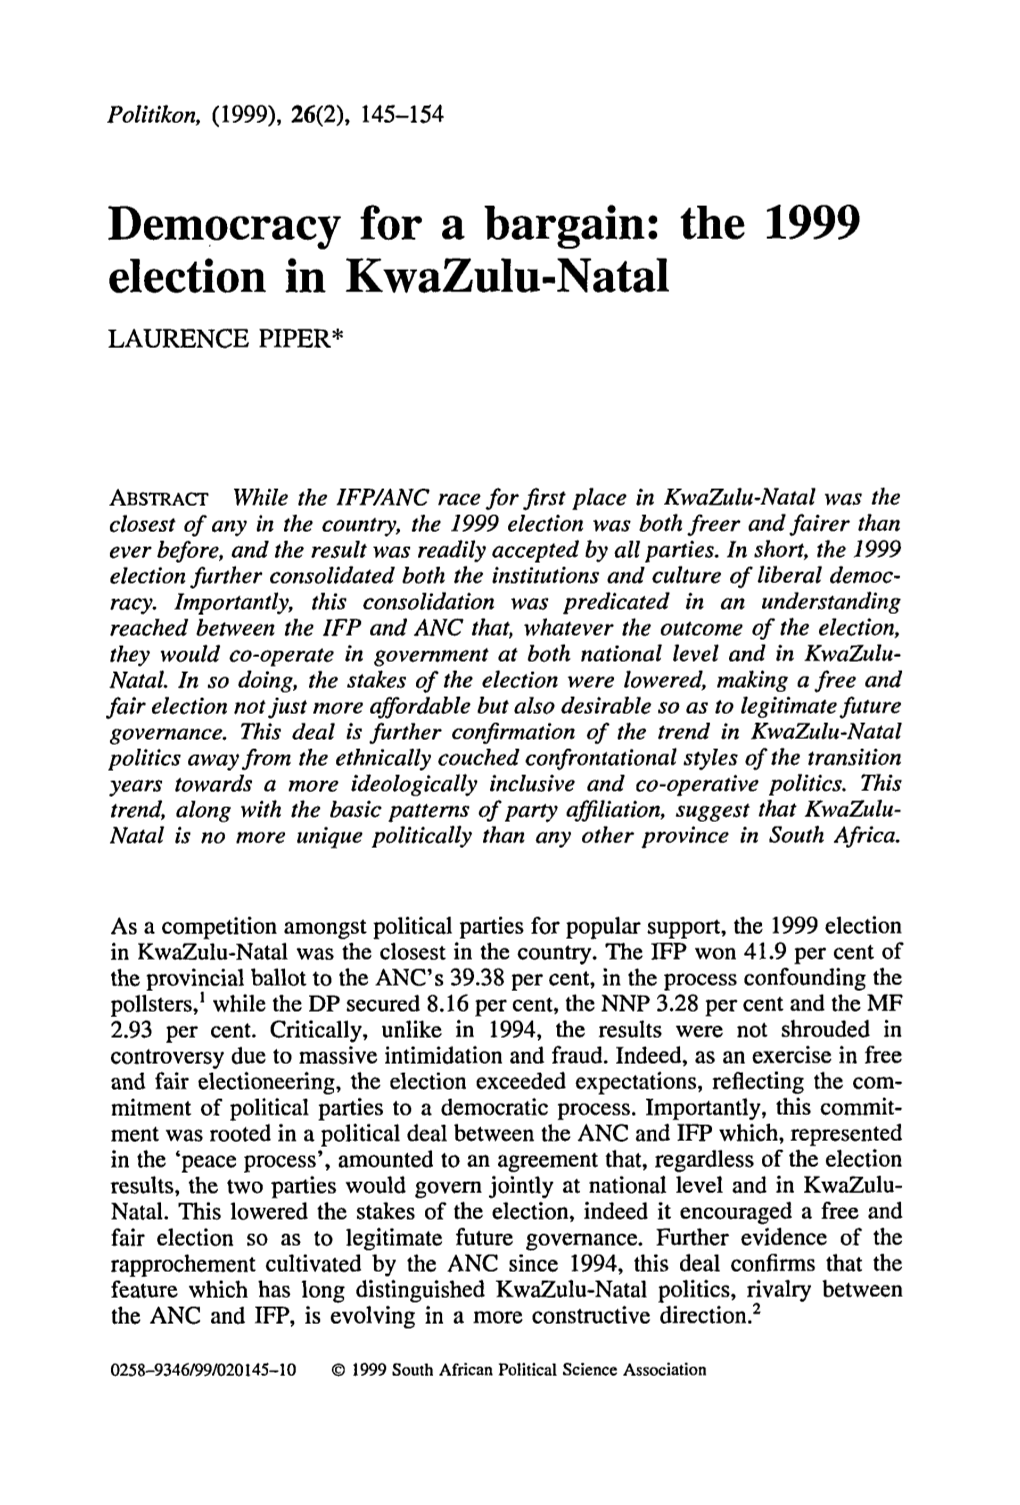 Democracy for a Bargain: the 1999 Election in Kwazulu-Natal LAURENCE PIPER*